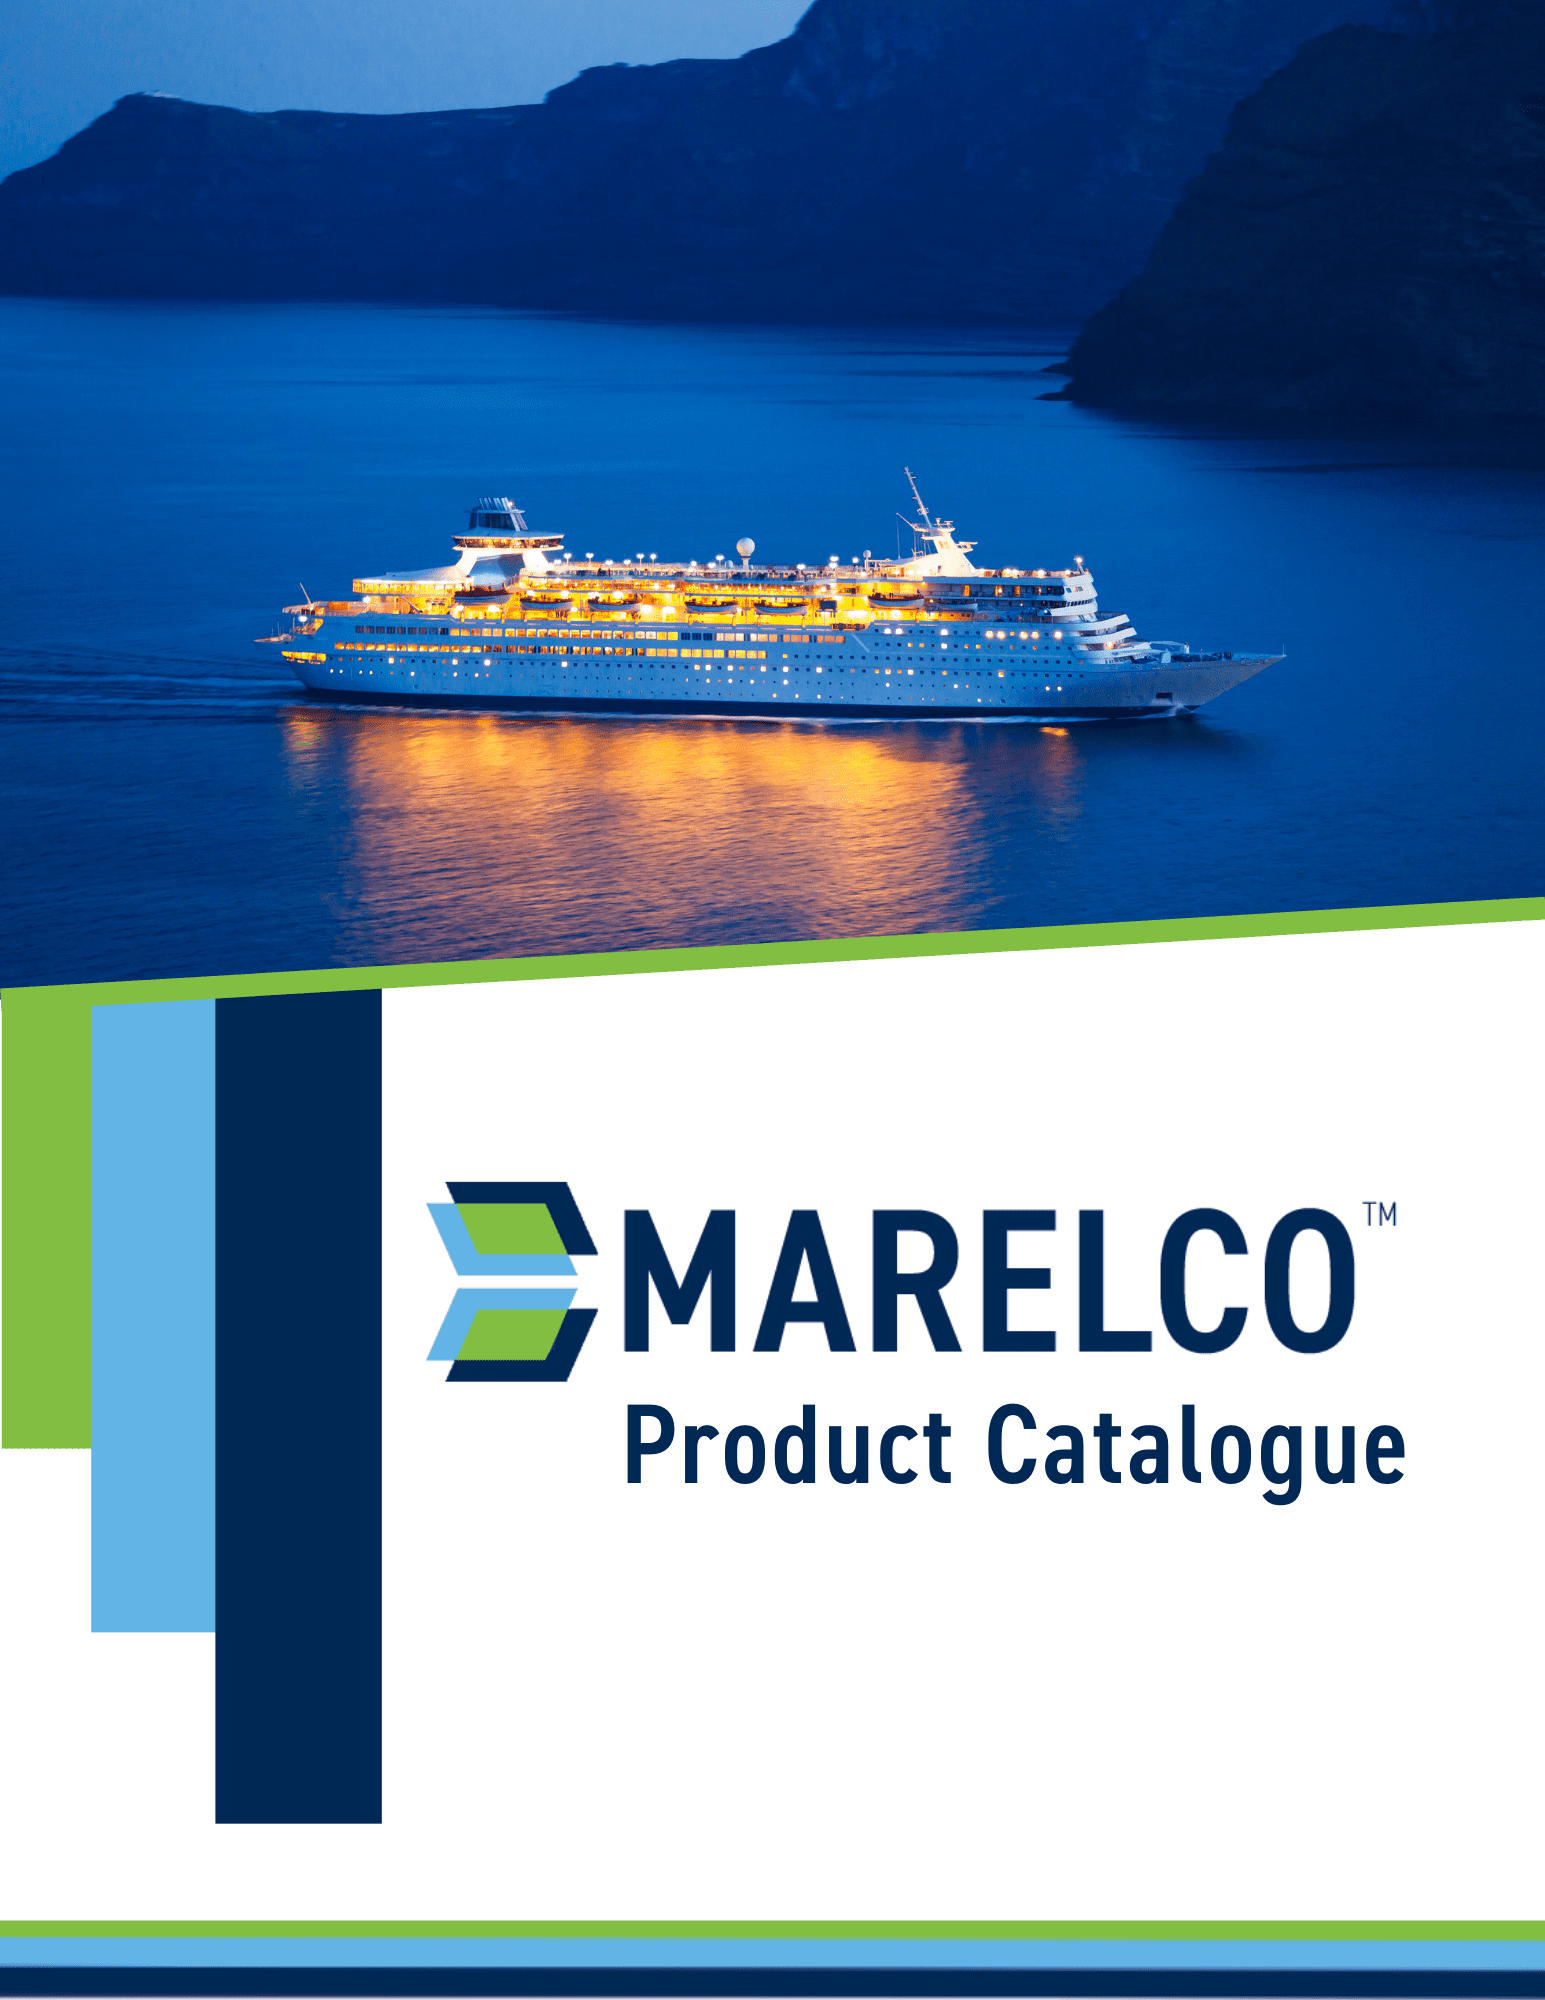 anticorrosion systems, anodes, copper anodes, mgps, marine growth protection, mgps, cathelco, marelco, antifouling solutions anticorrosion